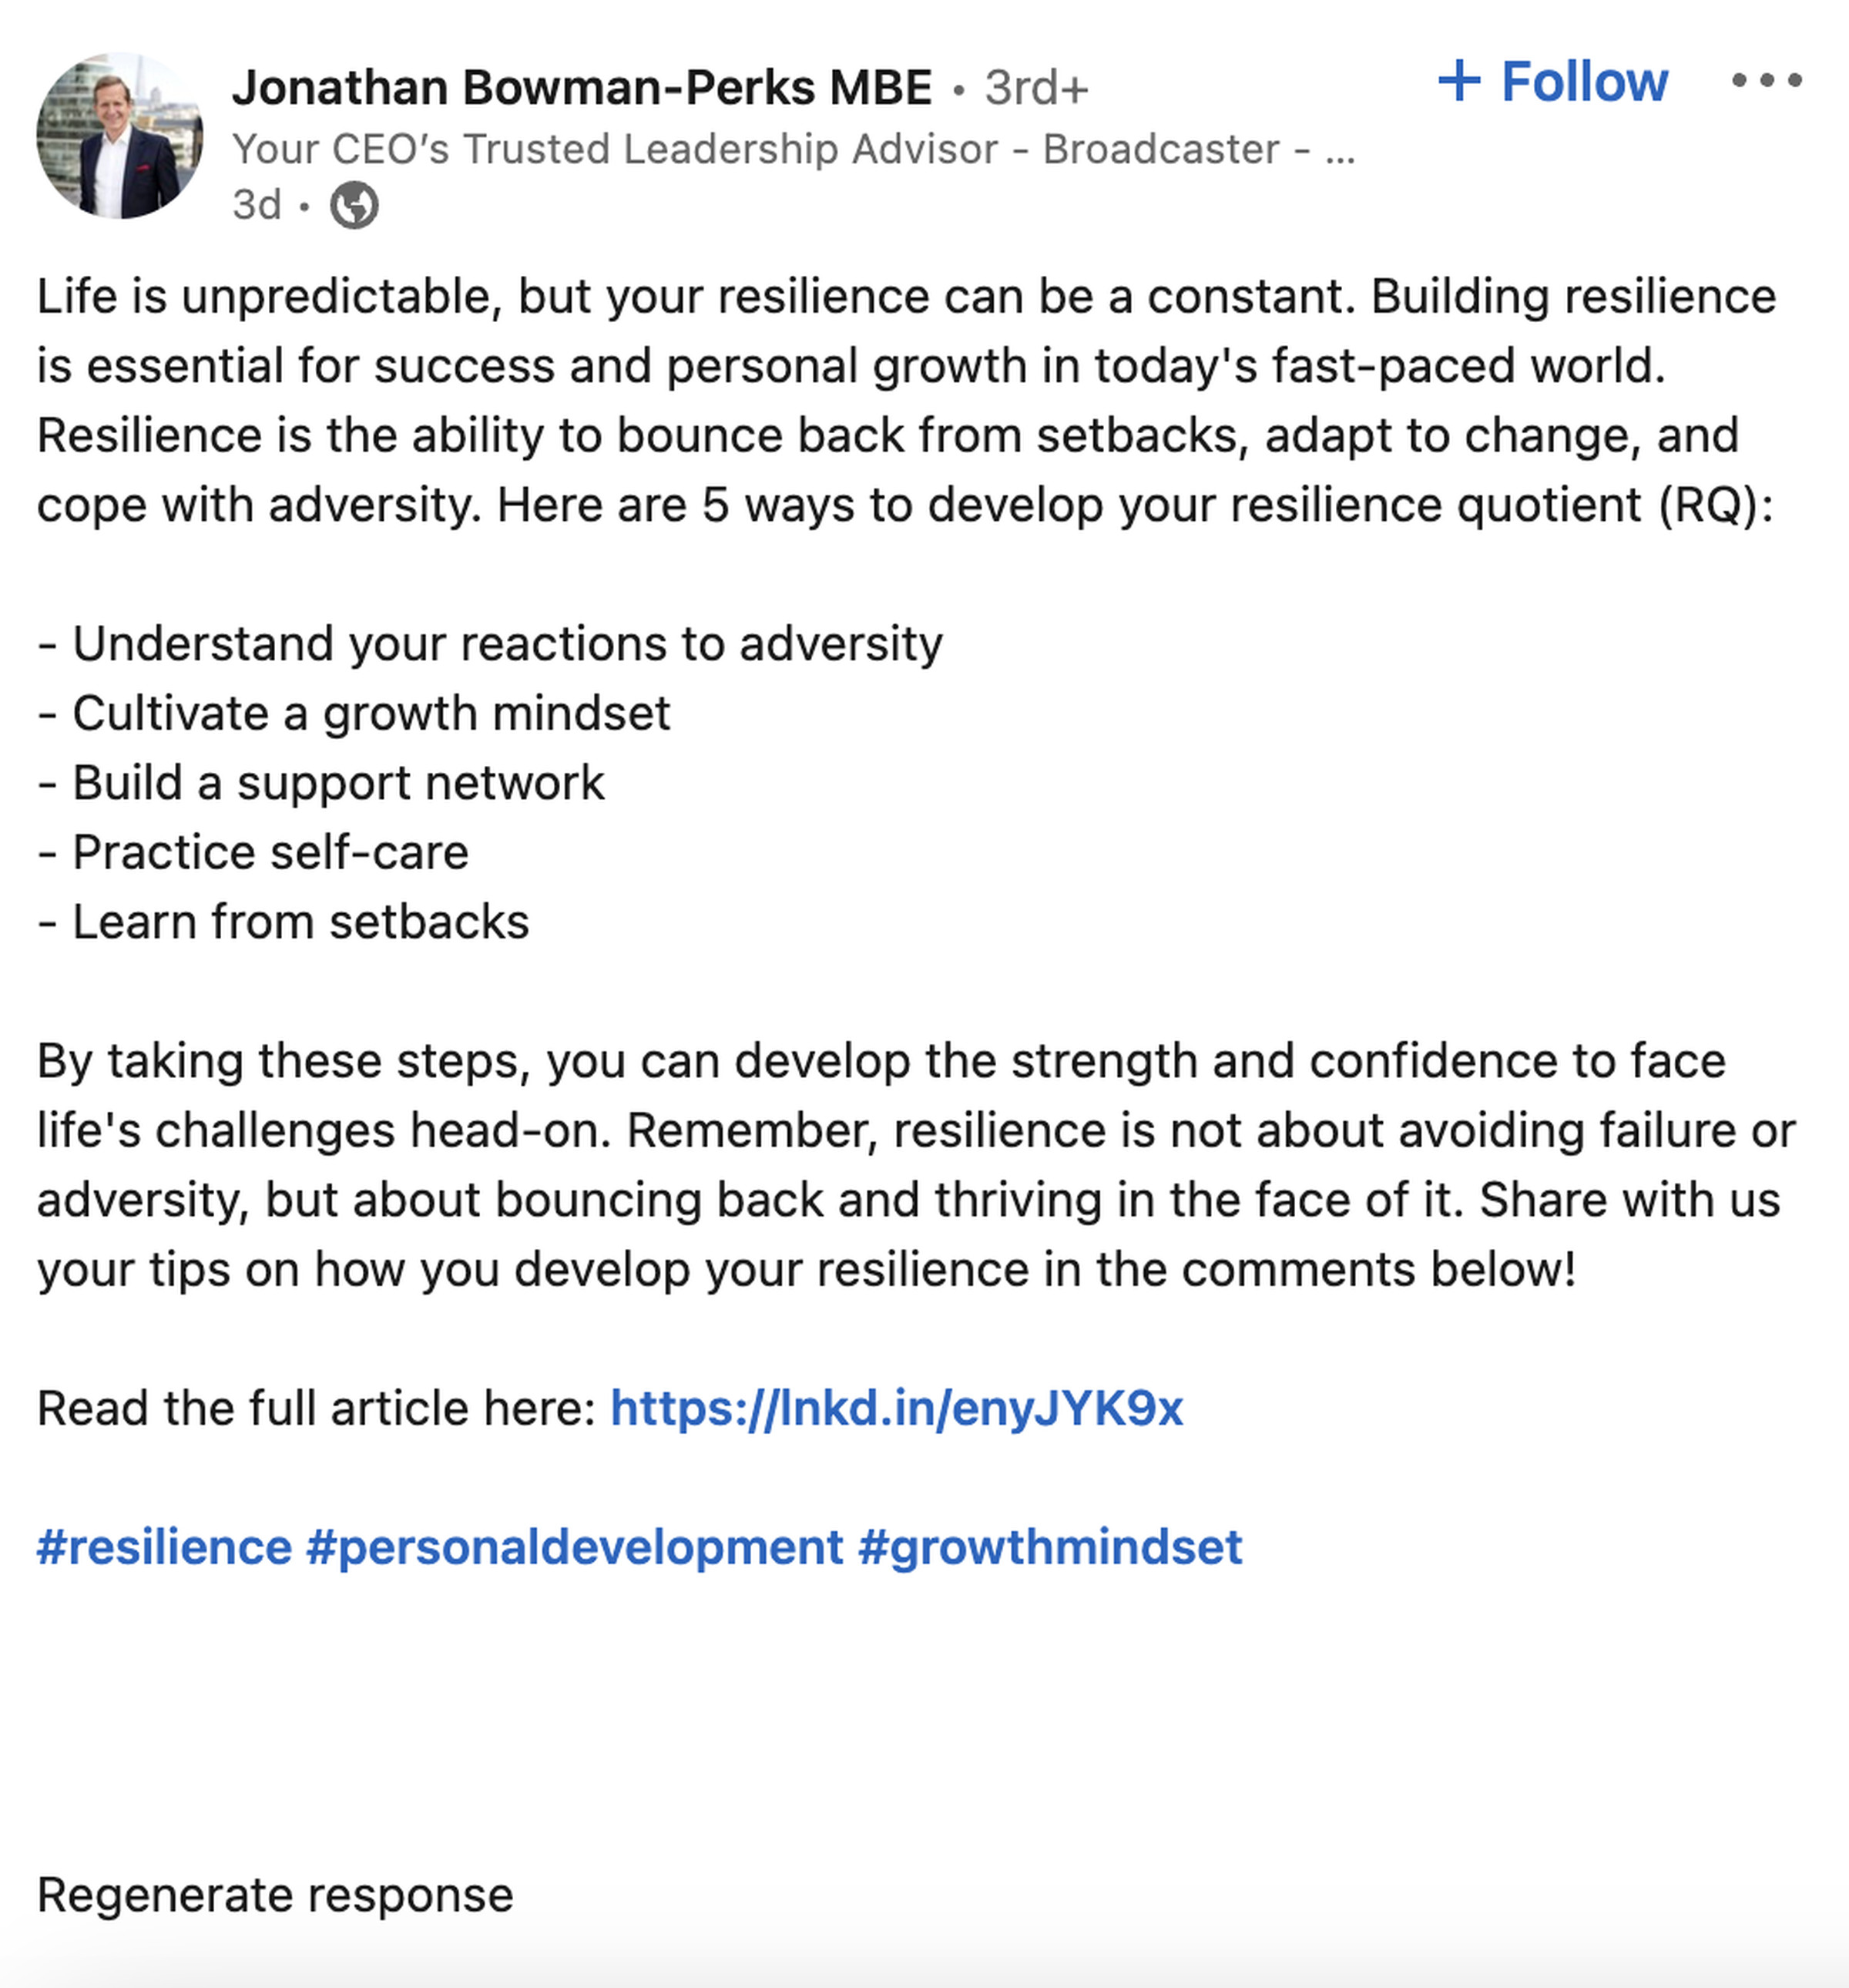 Screenshot of a LinkedIn post exhorting readers to build resilience, follow personal growth, etc, etc. It ends with the phrase “Regenerate Response.”